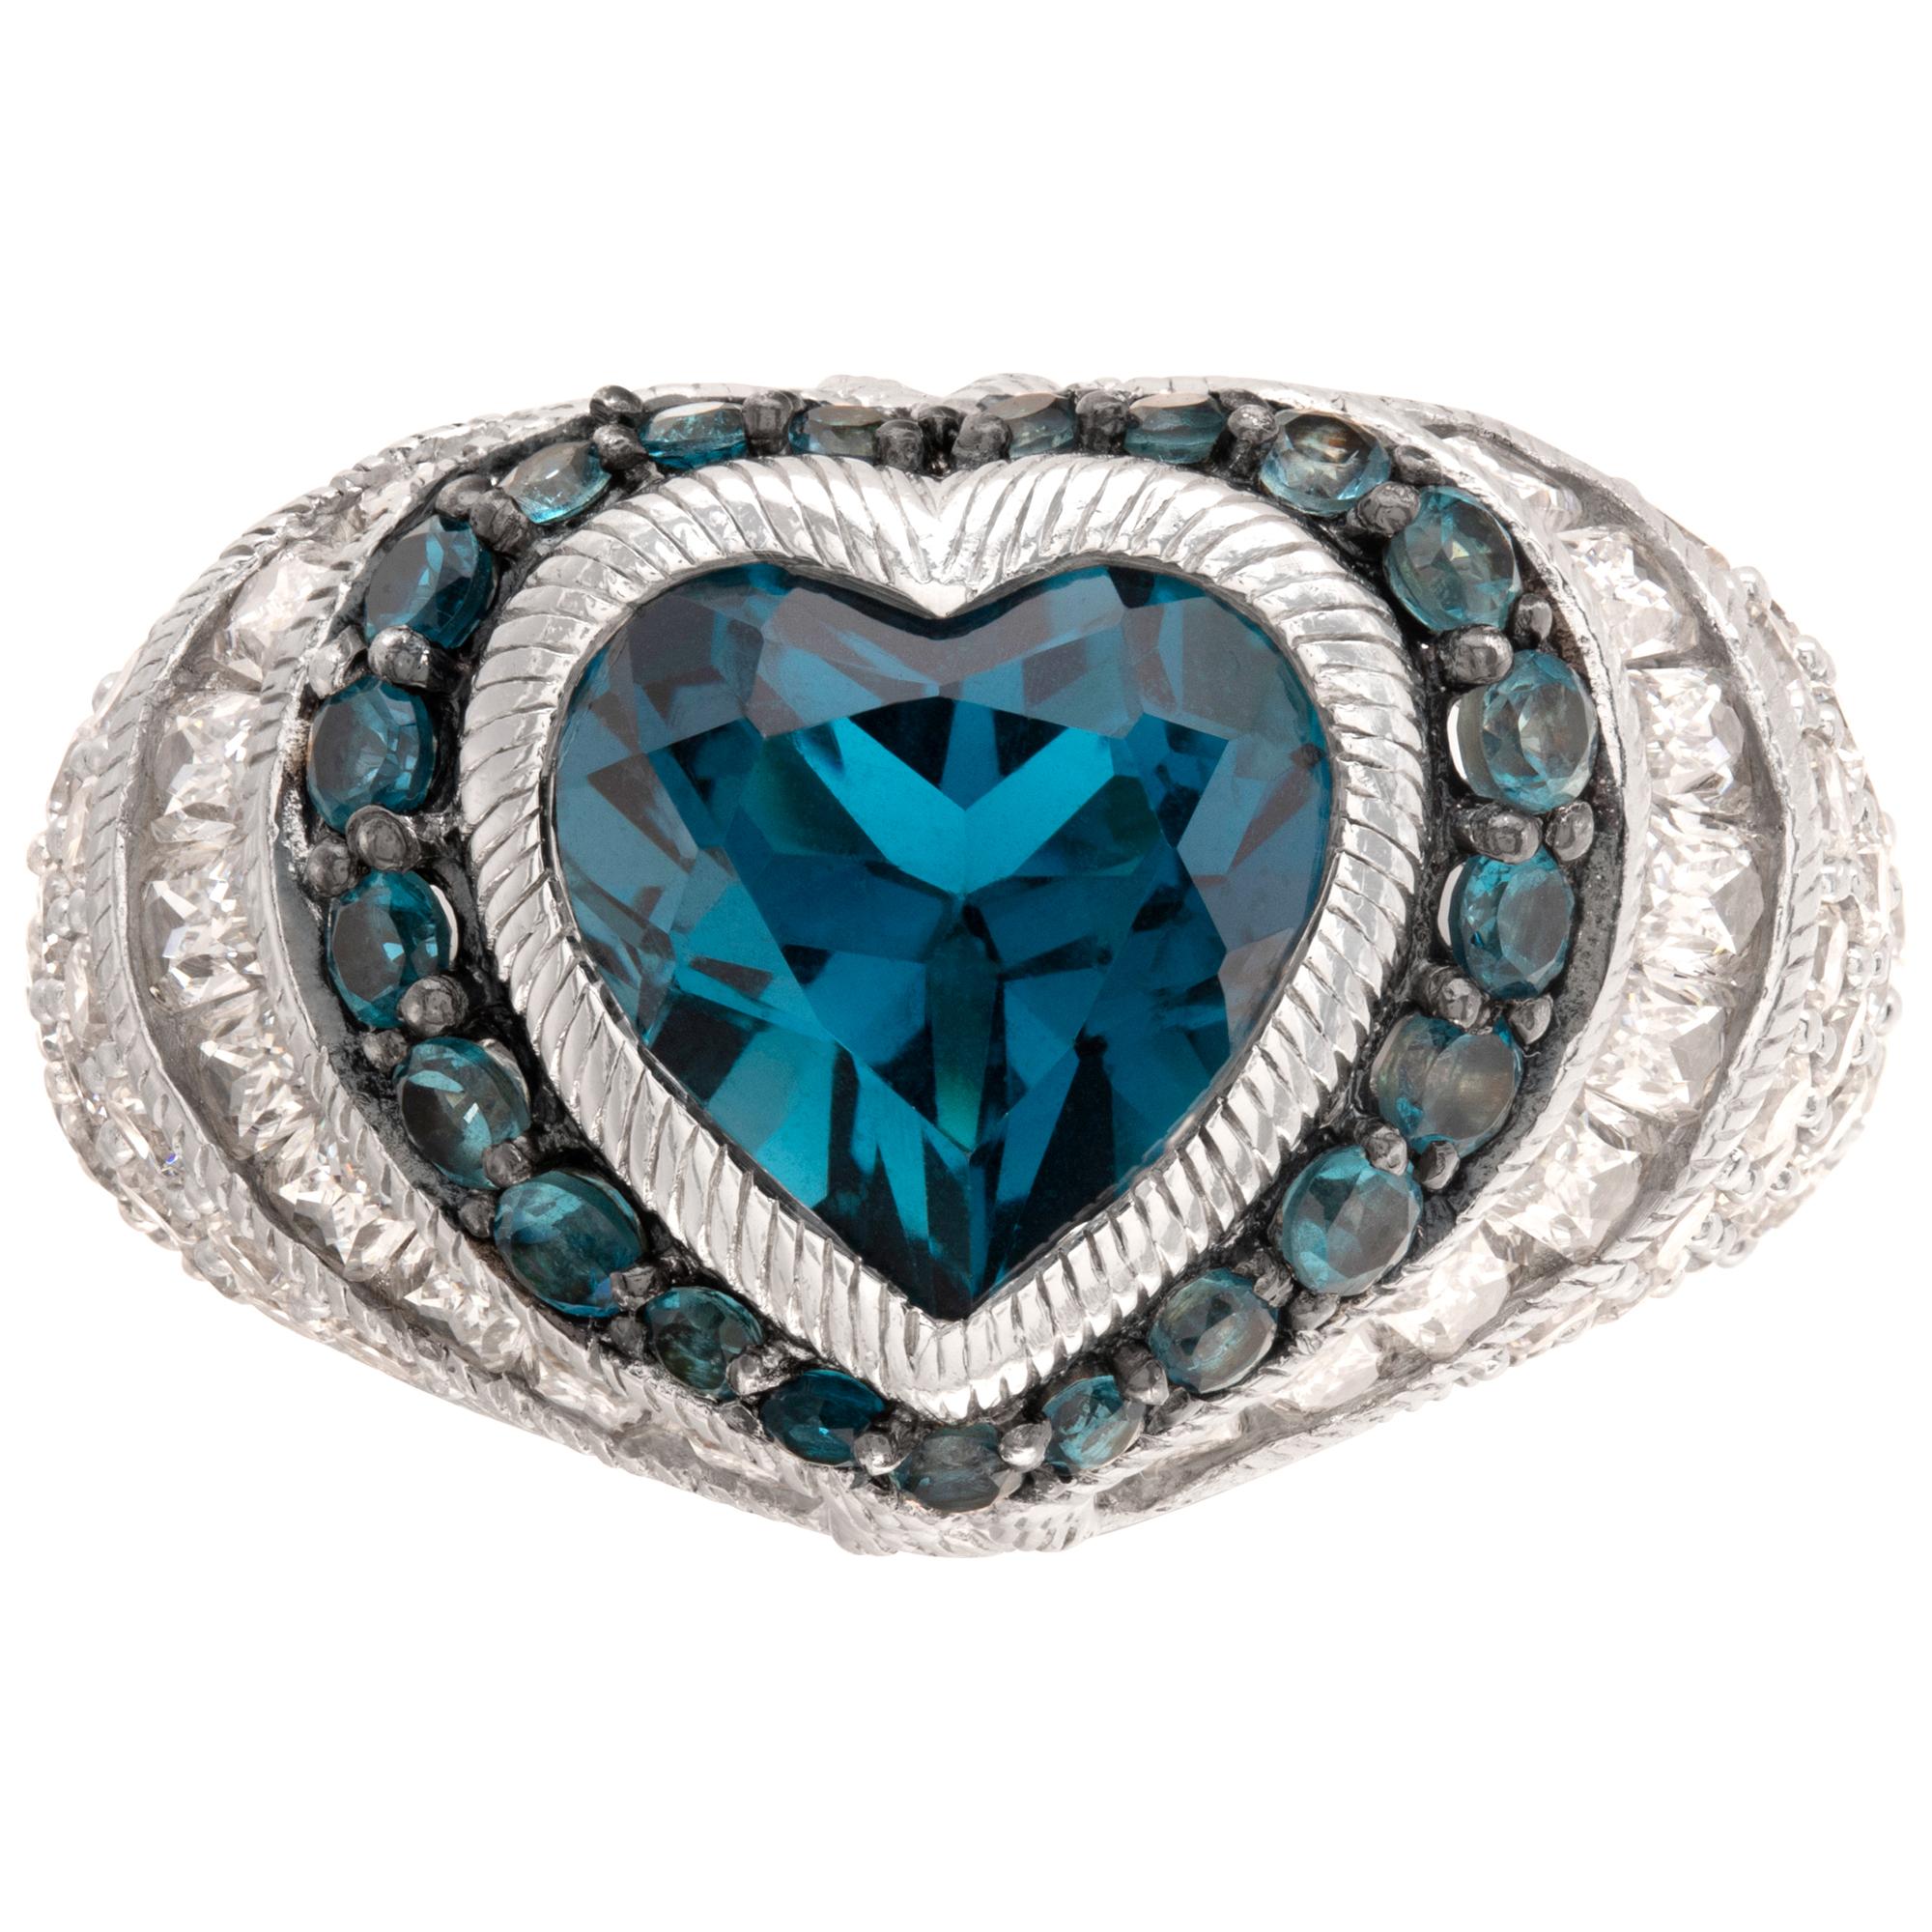 Judith Ripka London Blue Topaz heart-shaped ring in sterling silver. Size 7, head 15mm thick, shank 5mm thick.This Judith Ripka ring is currently size 7 and some items can be sized up or down, please ask! It weighs 8 pennyweights and is Sterling